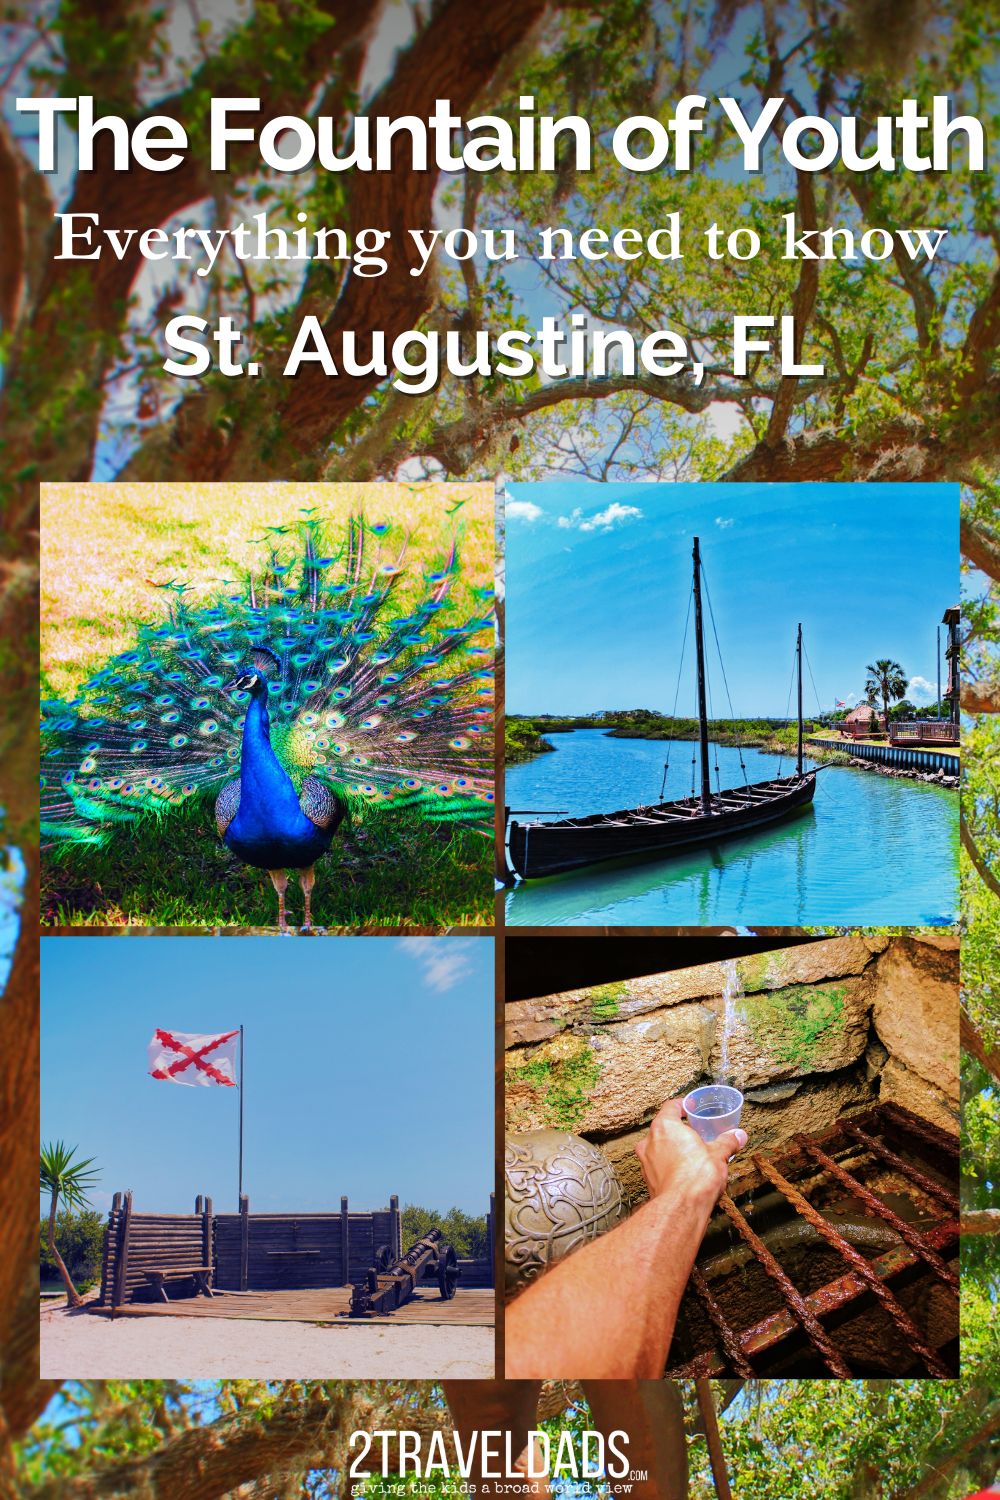 While it may not keep you forever young, the Fountain of Youth in St Augustine is two parts archeological site, 1 part tourist attraction and many parts mystery. Cloaked in the legend of PonceDe Leon, this beautiful park on the water is a must stop.